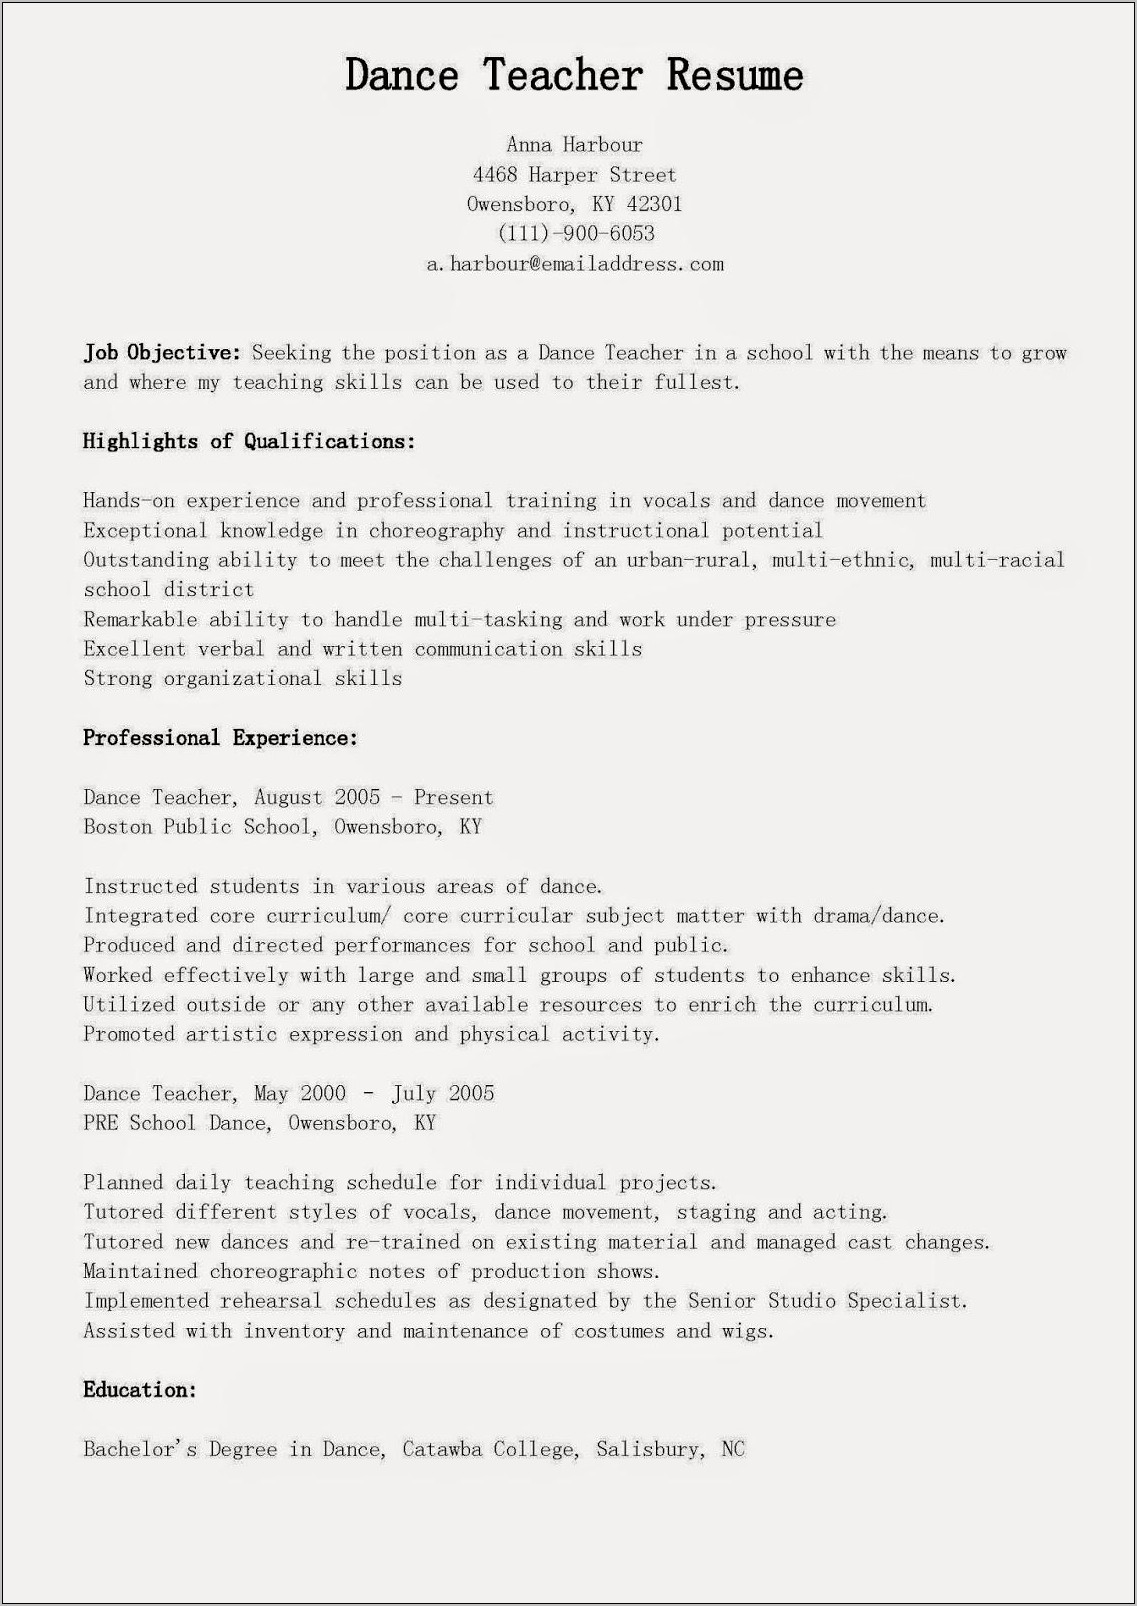 Excellent Verbal And Written Communication Skills Resume